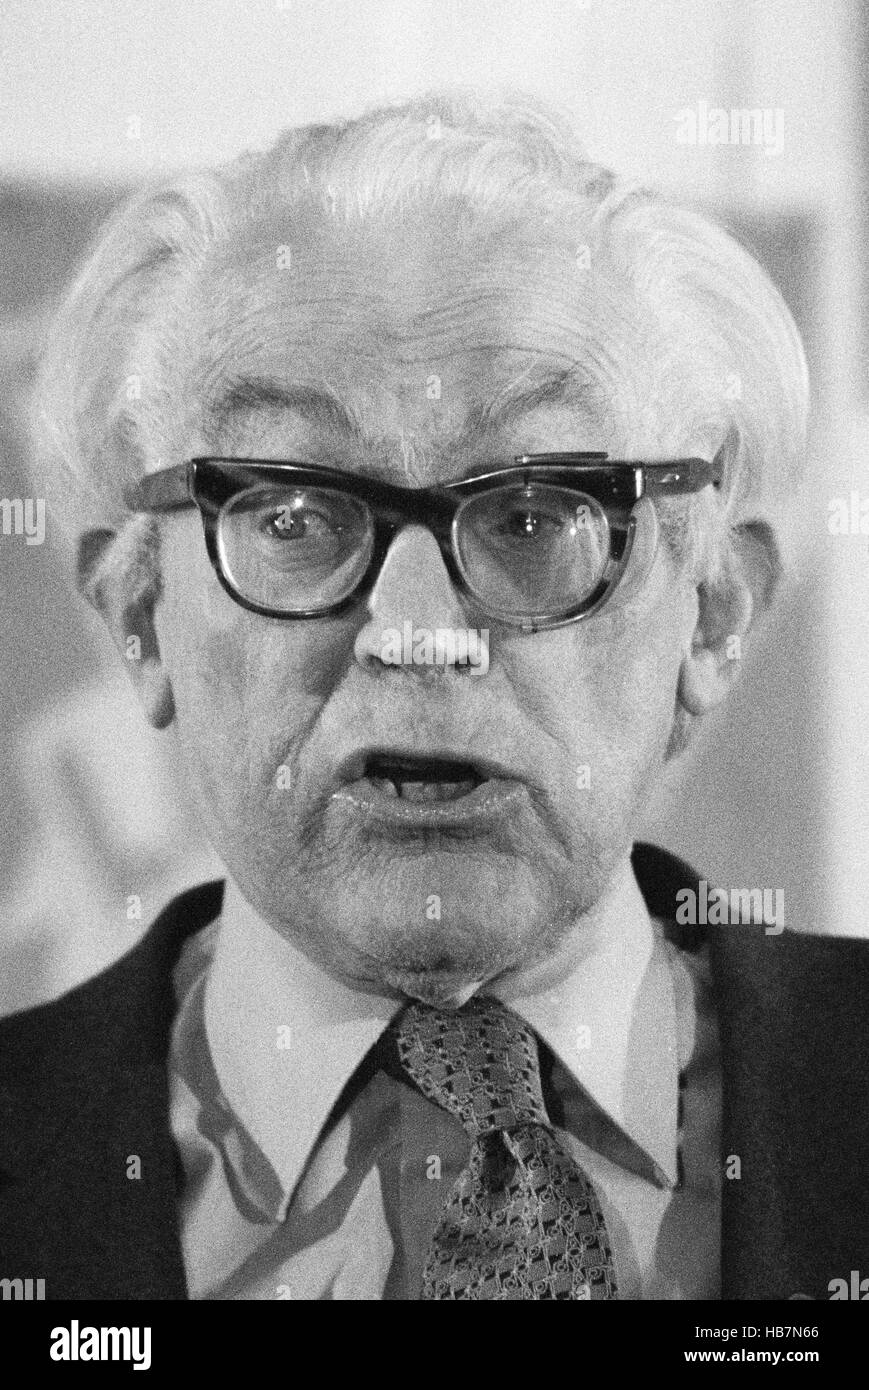 Michael Foot endorses Peter Tatchell as the Labour candidate in the Bermondsey By election, 1983.  Simon Hughes stood for the Liberal Party. Following a bitter campaign, the Liberals used homophobic smears against Tatchell making huge gains and took the seat, Stock Photo